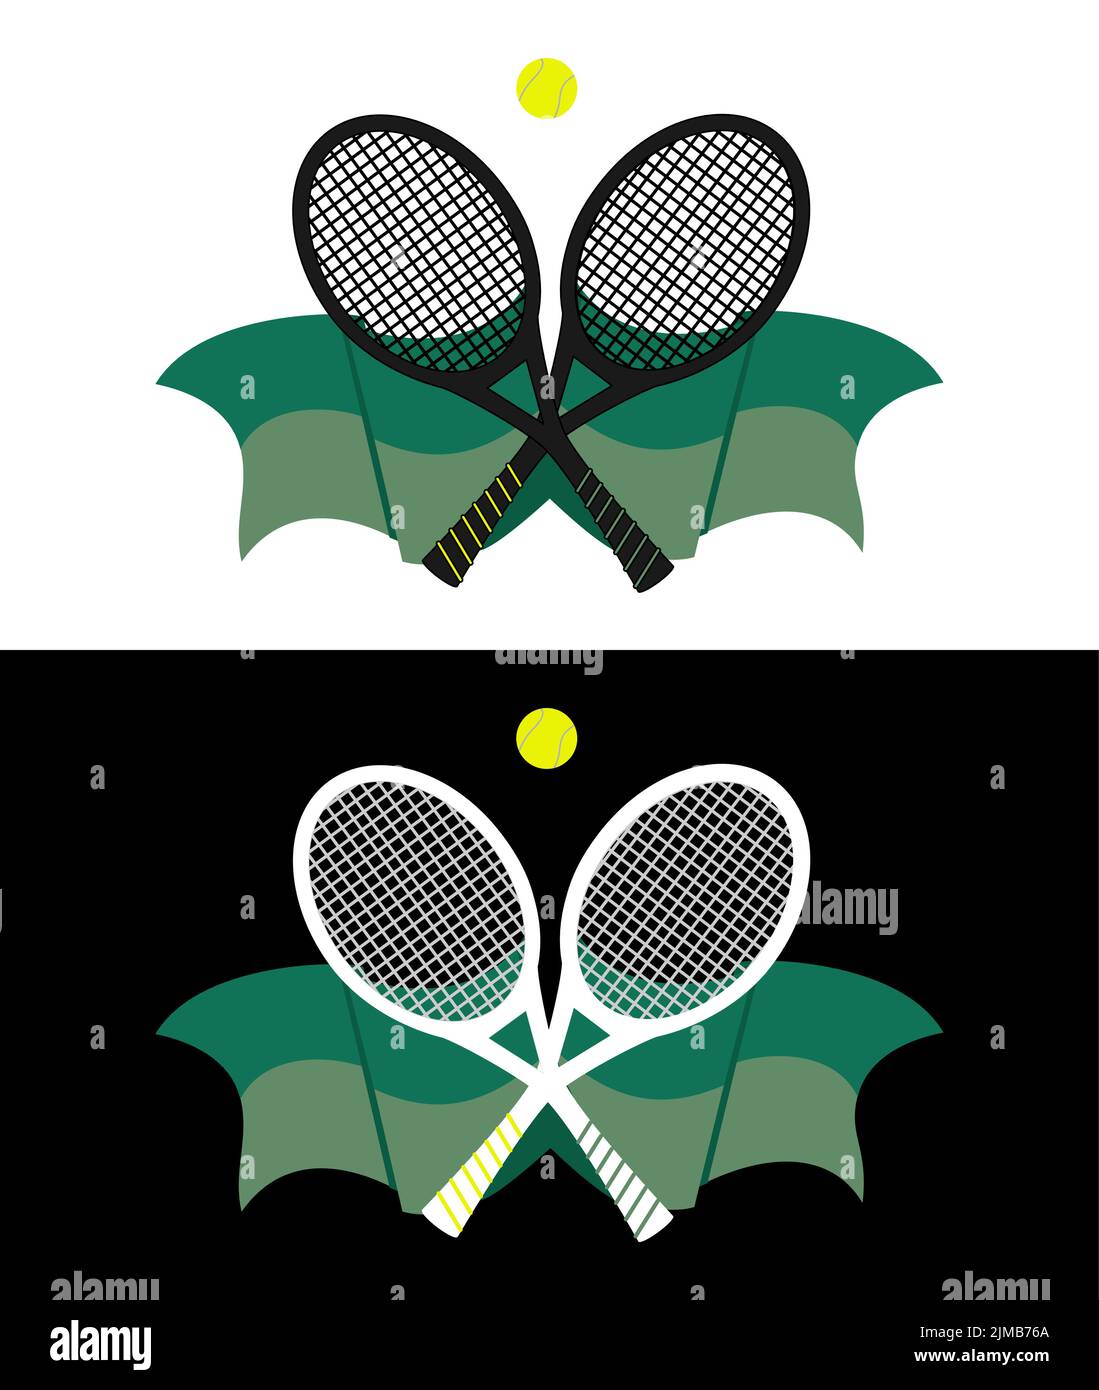 Tennis sport logo icon design badge template, design element with two rackets and ball. Green, yellow, black and white colors. Made in vector. Stock Vector